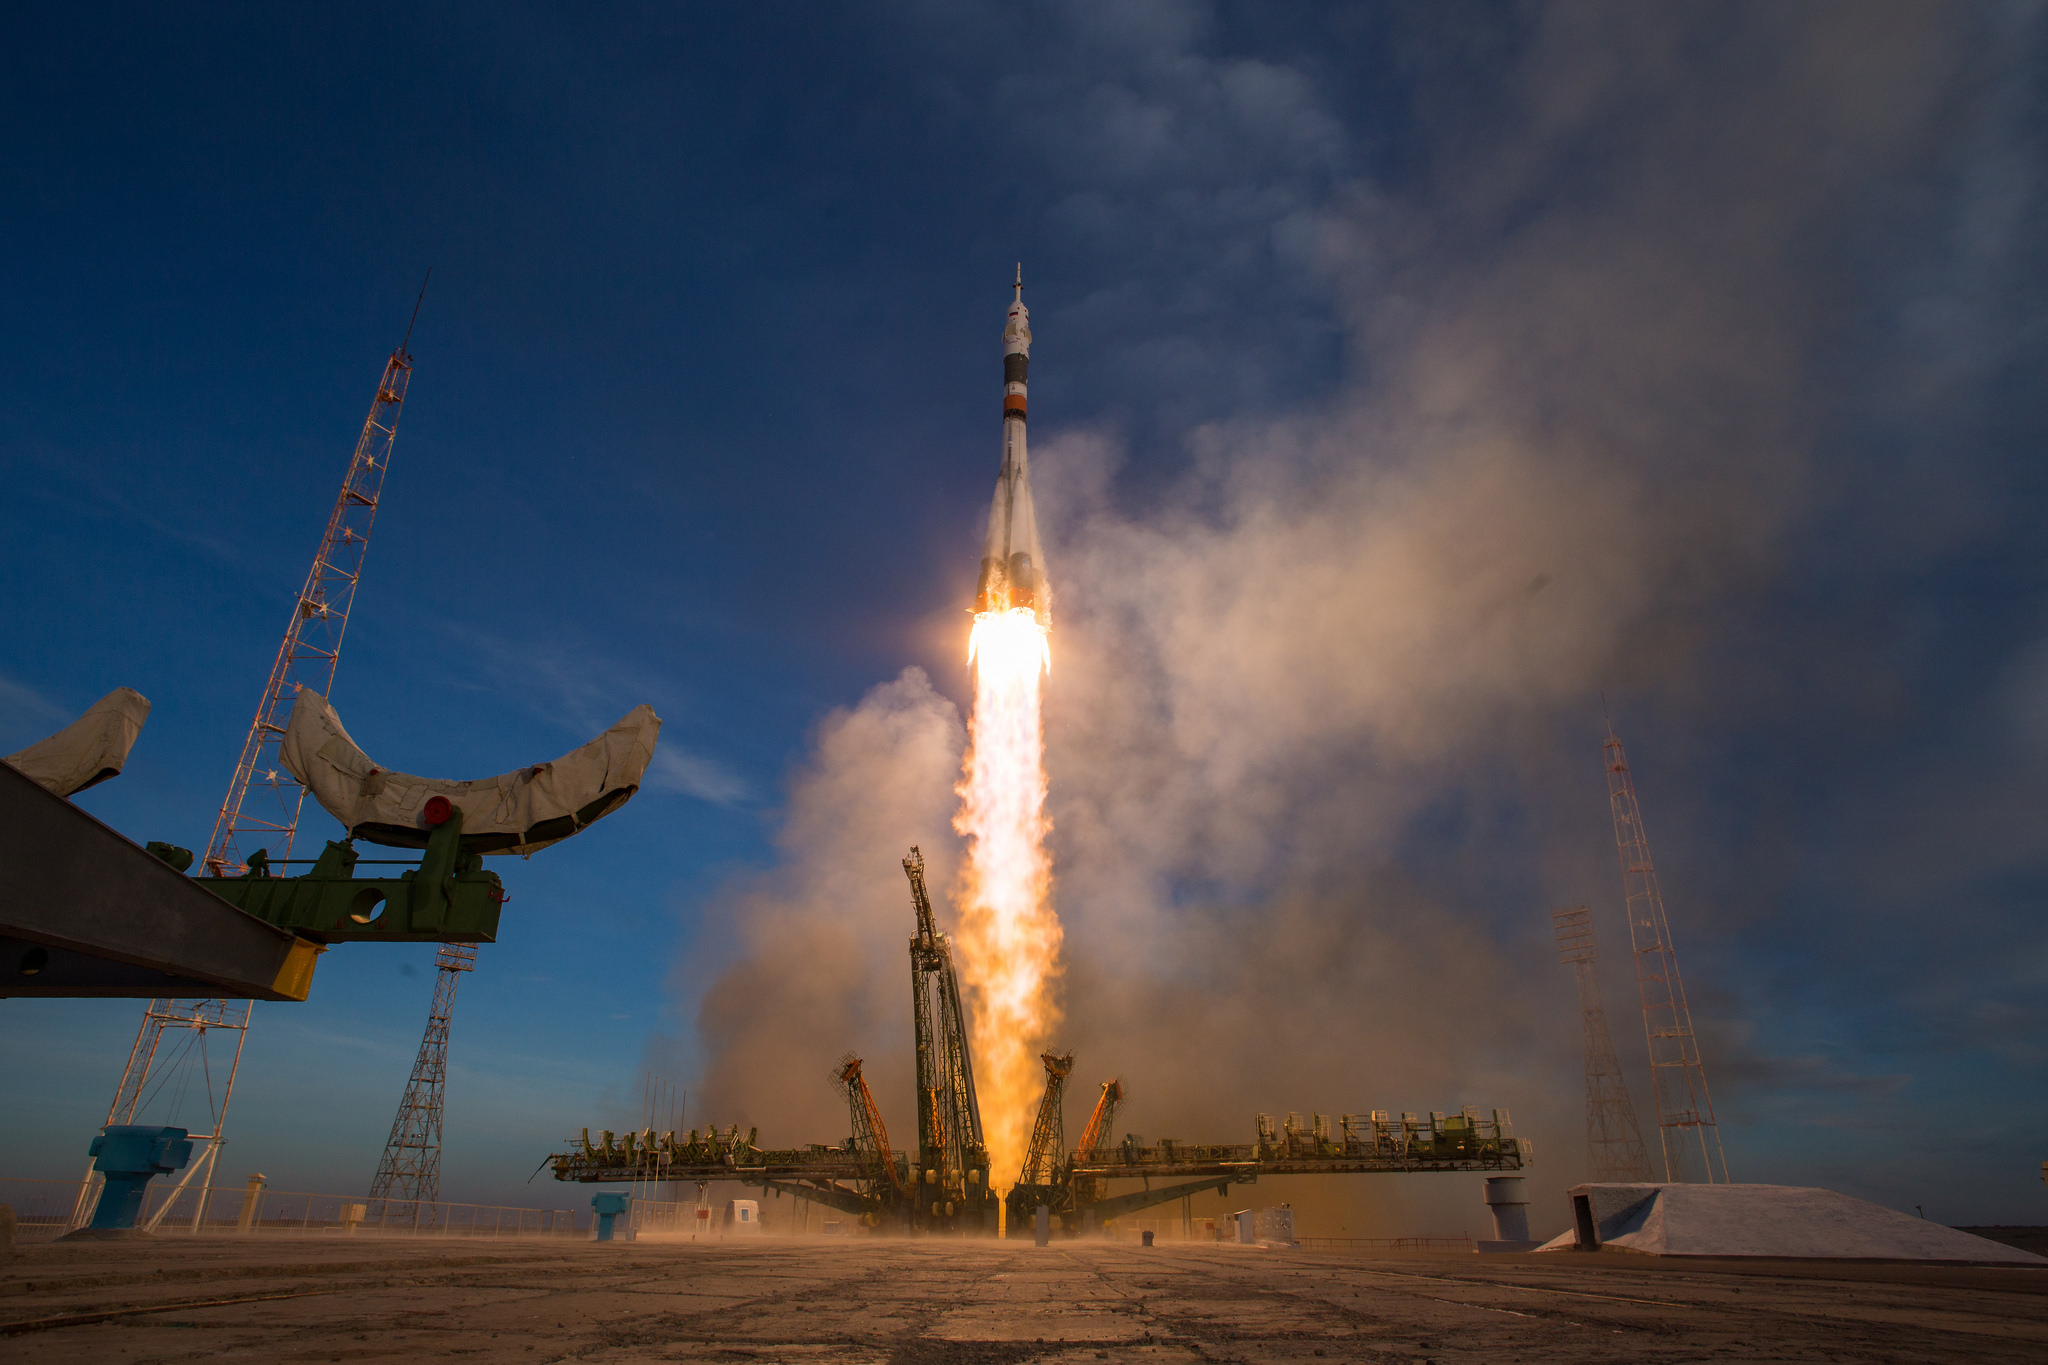 A Soyuz booster rocket launches the Soyuz MS-11 spacecraft from the Baikonur Cosmodrome in Kazakhstan on Monday, Dec. 3, 2018